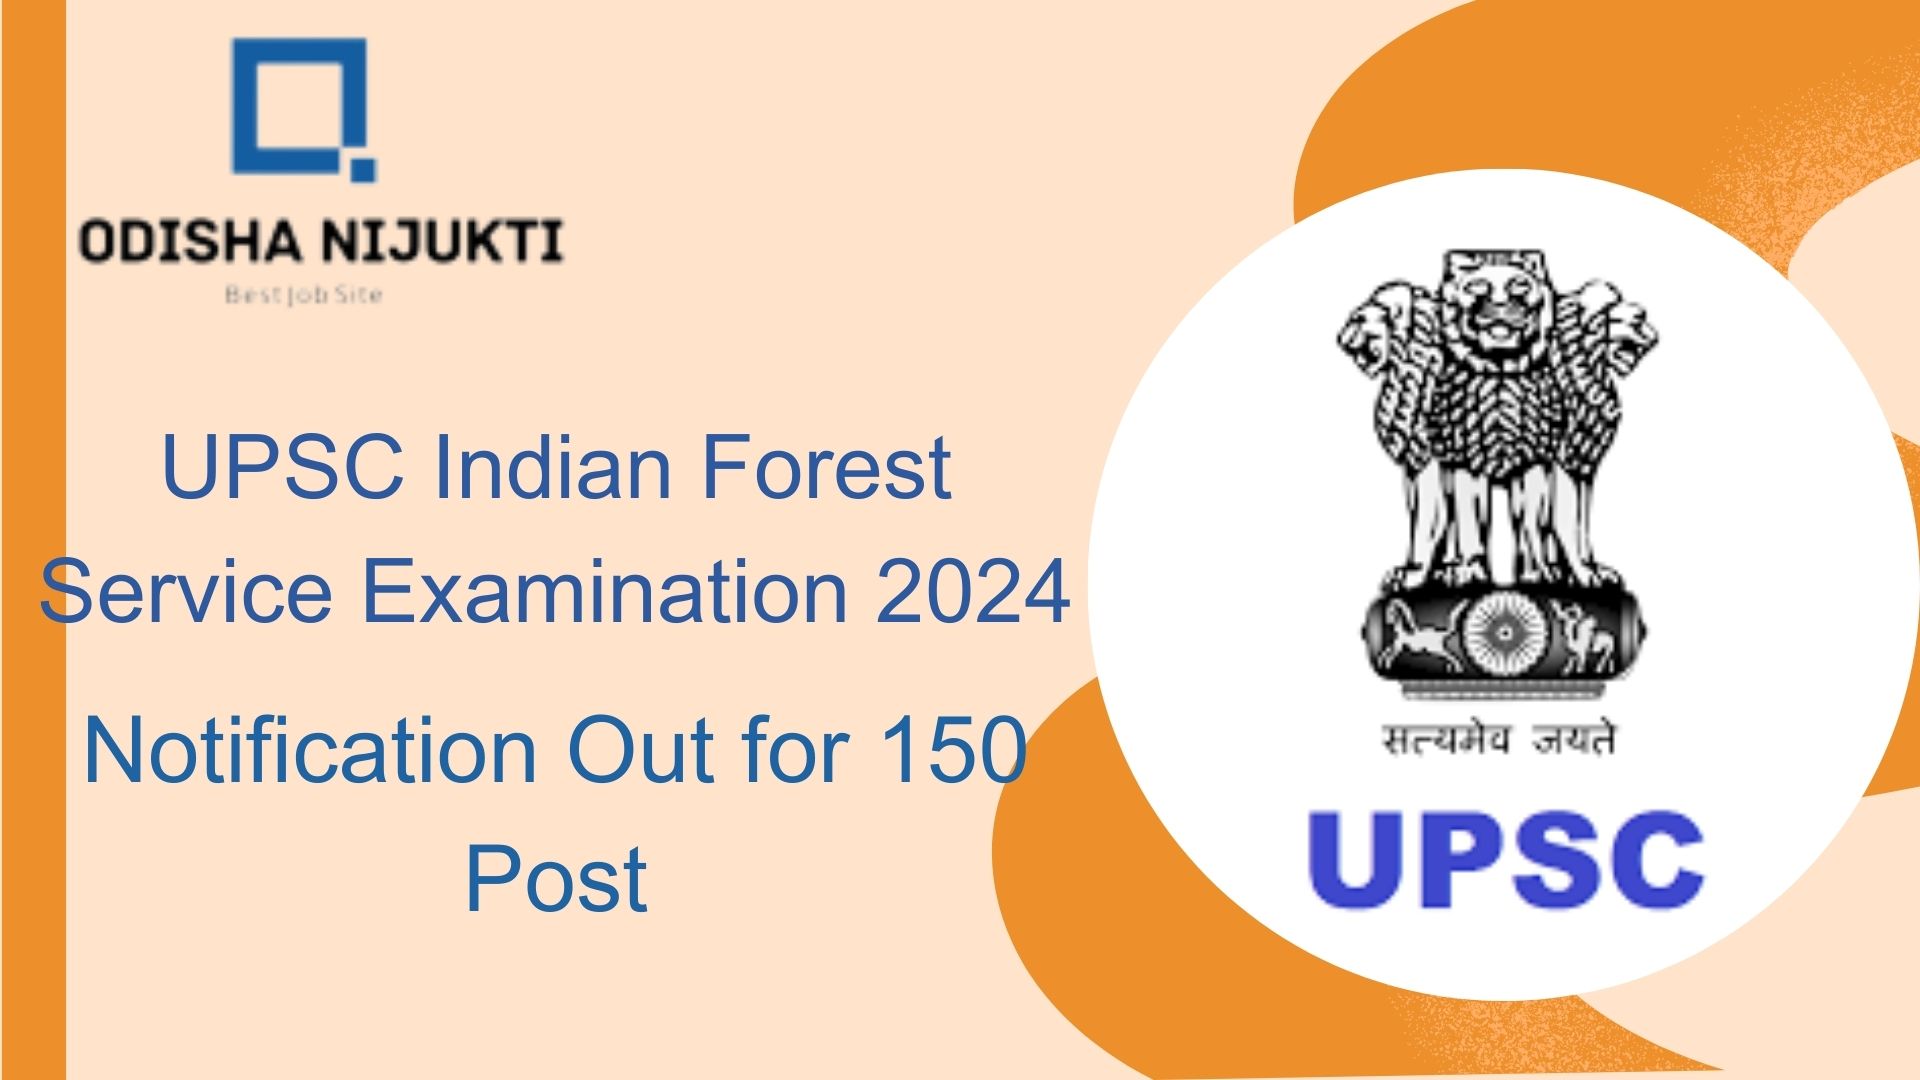 UPSC-Indian-Forest-Service-Examination-2024-Notification-Out-for-150-Post